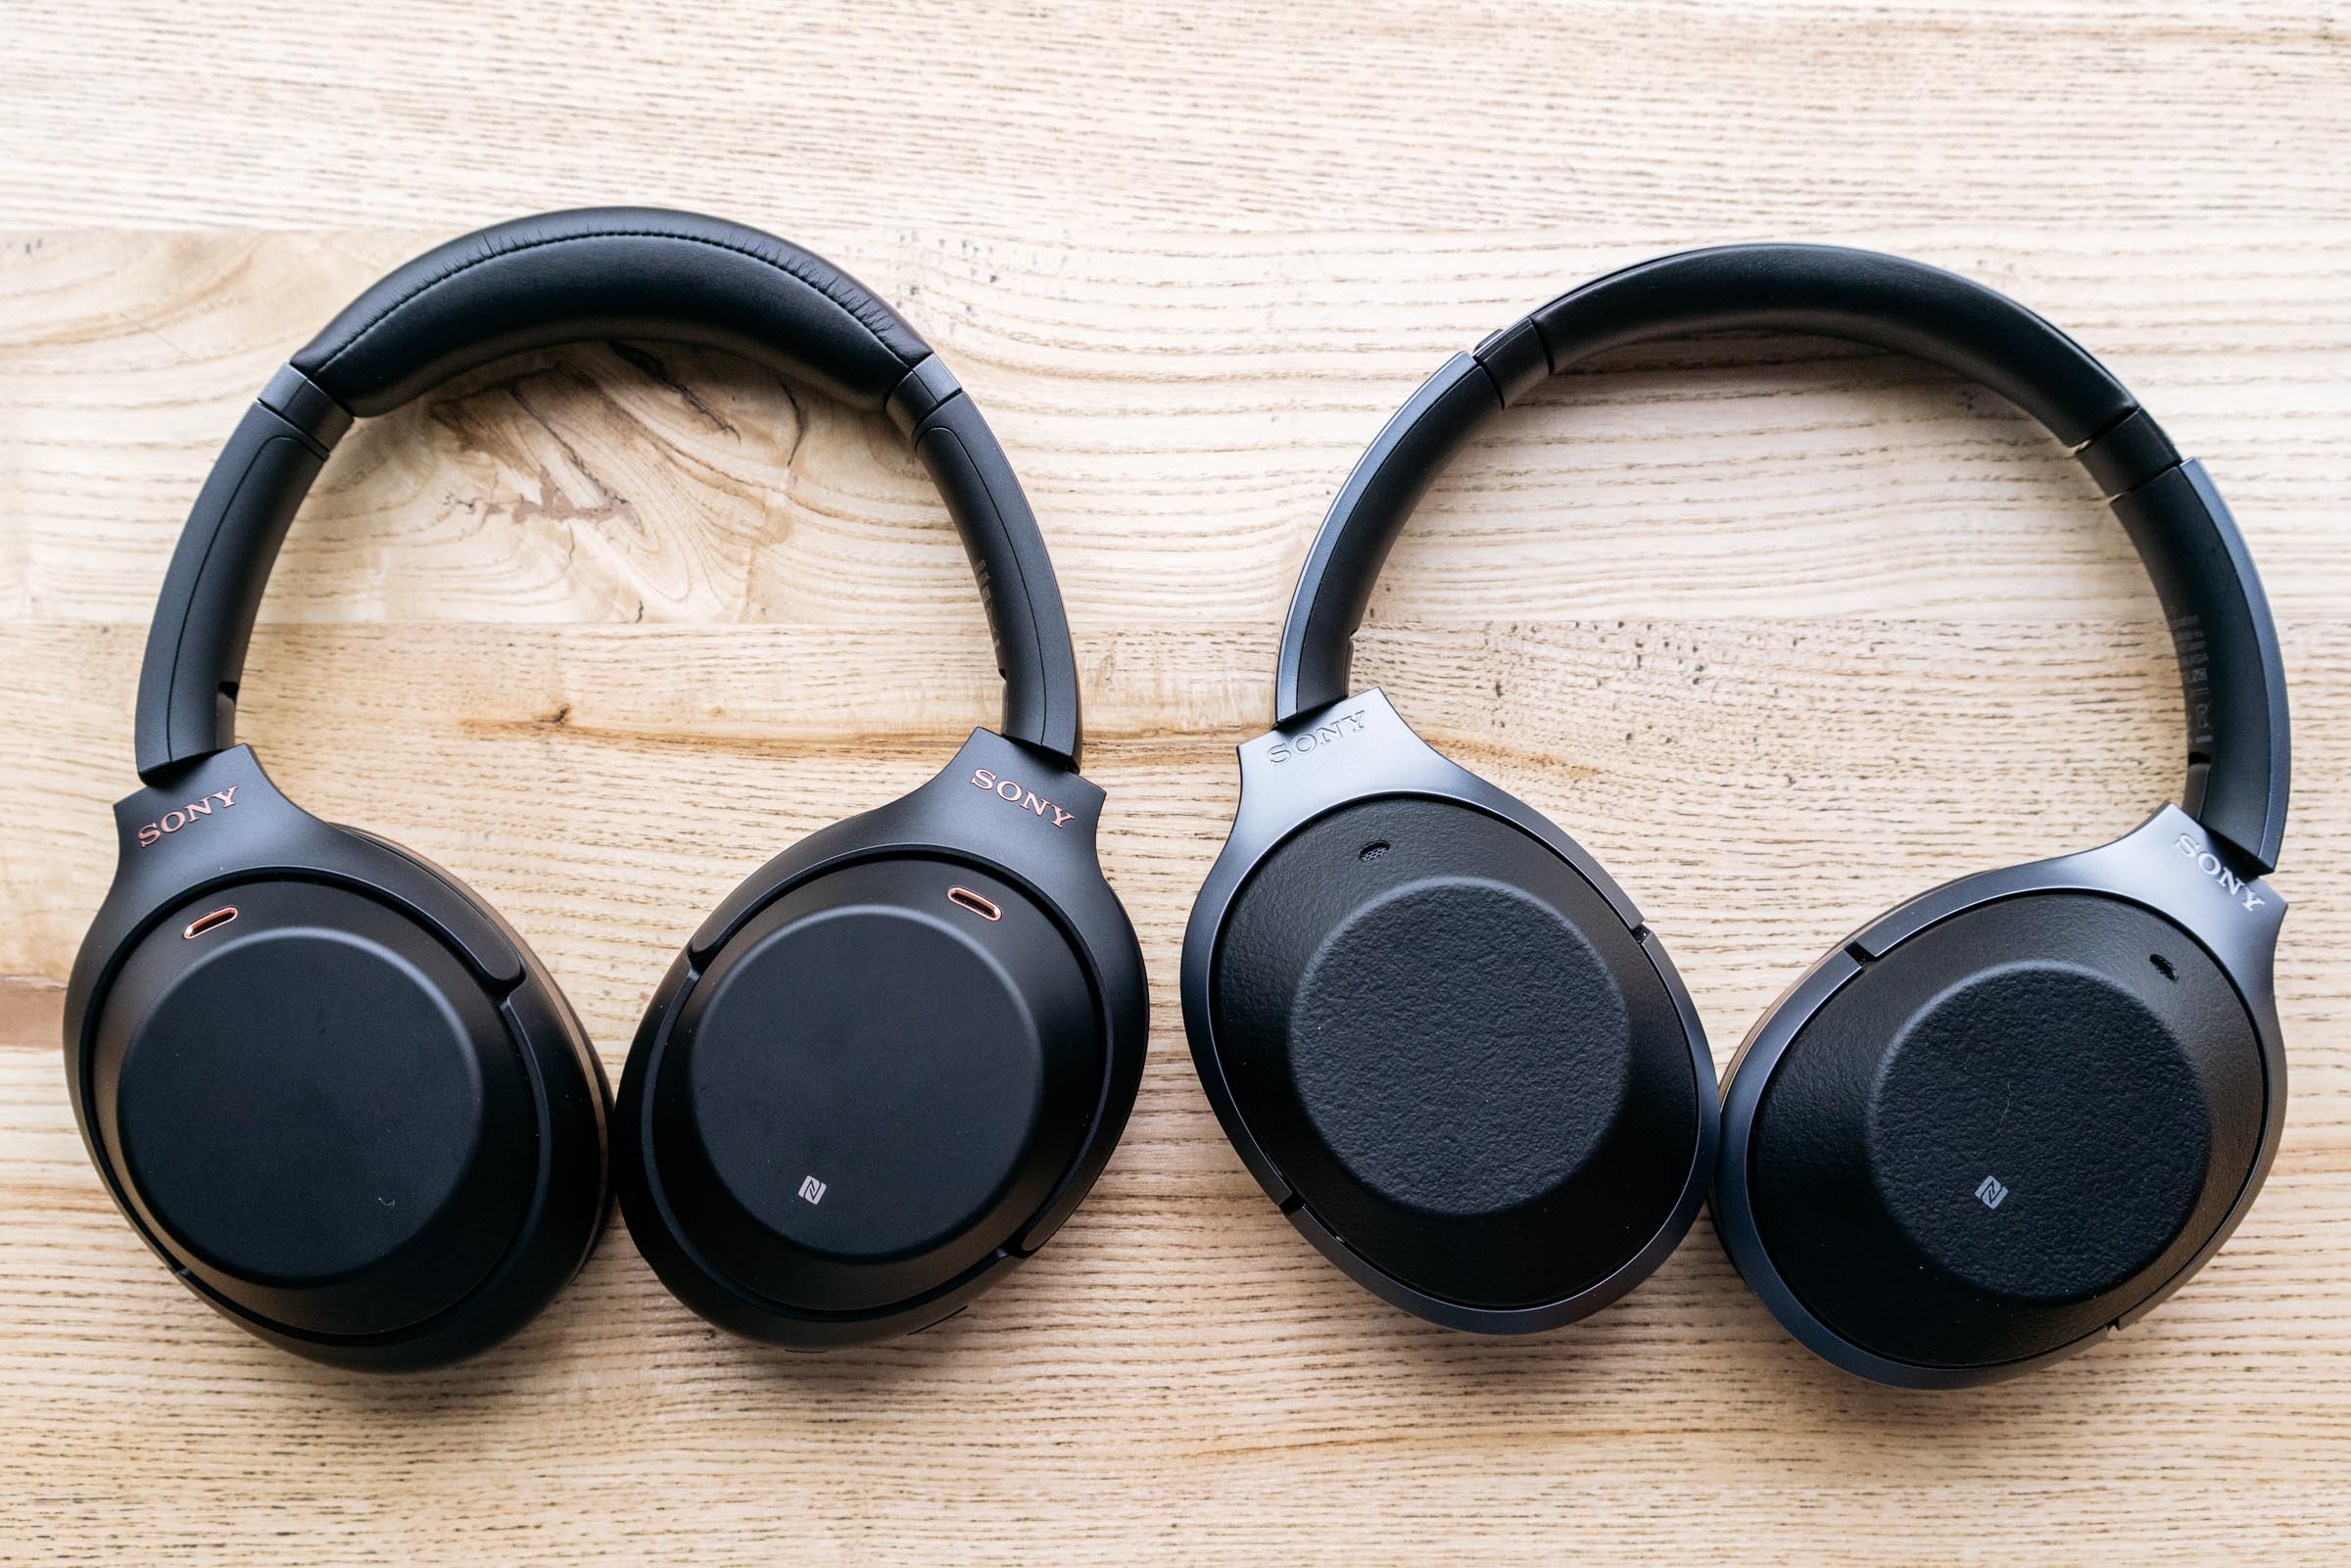 I regret a little that I tested the Sony WH-1000XM3. Review of new headphones from ANC